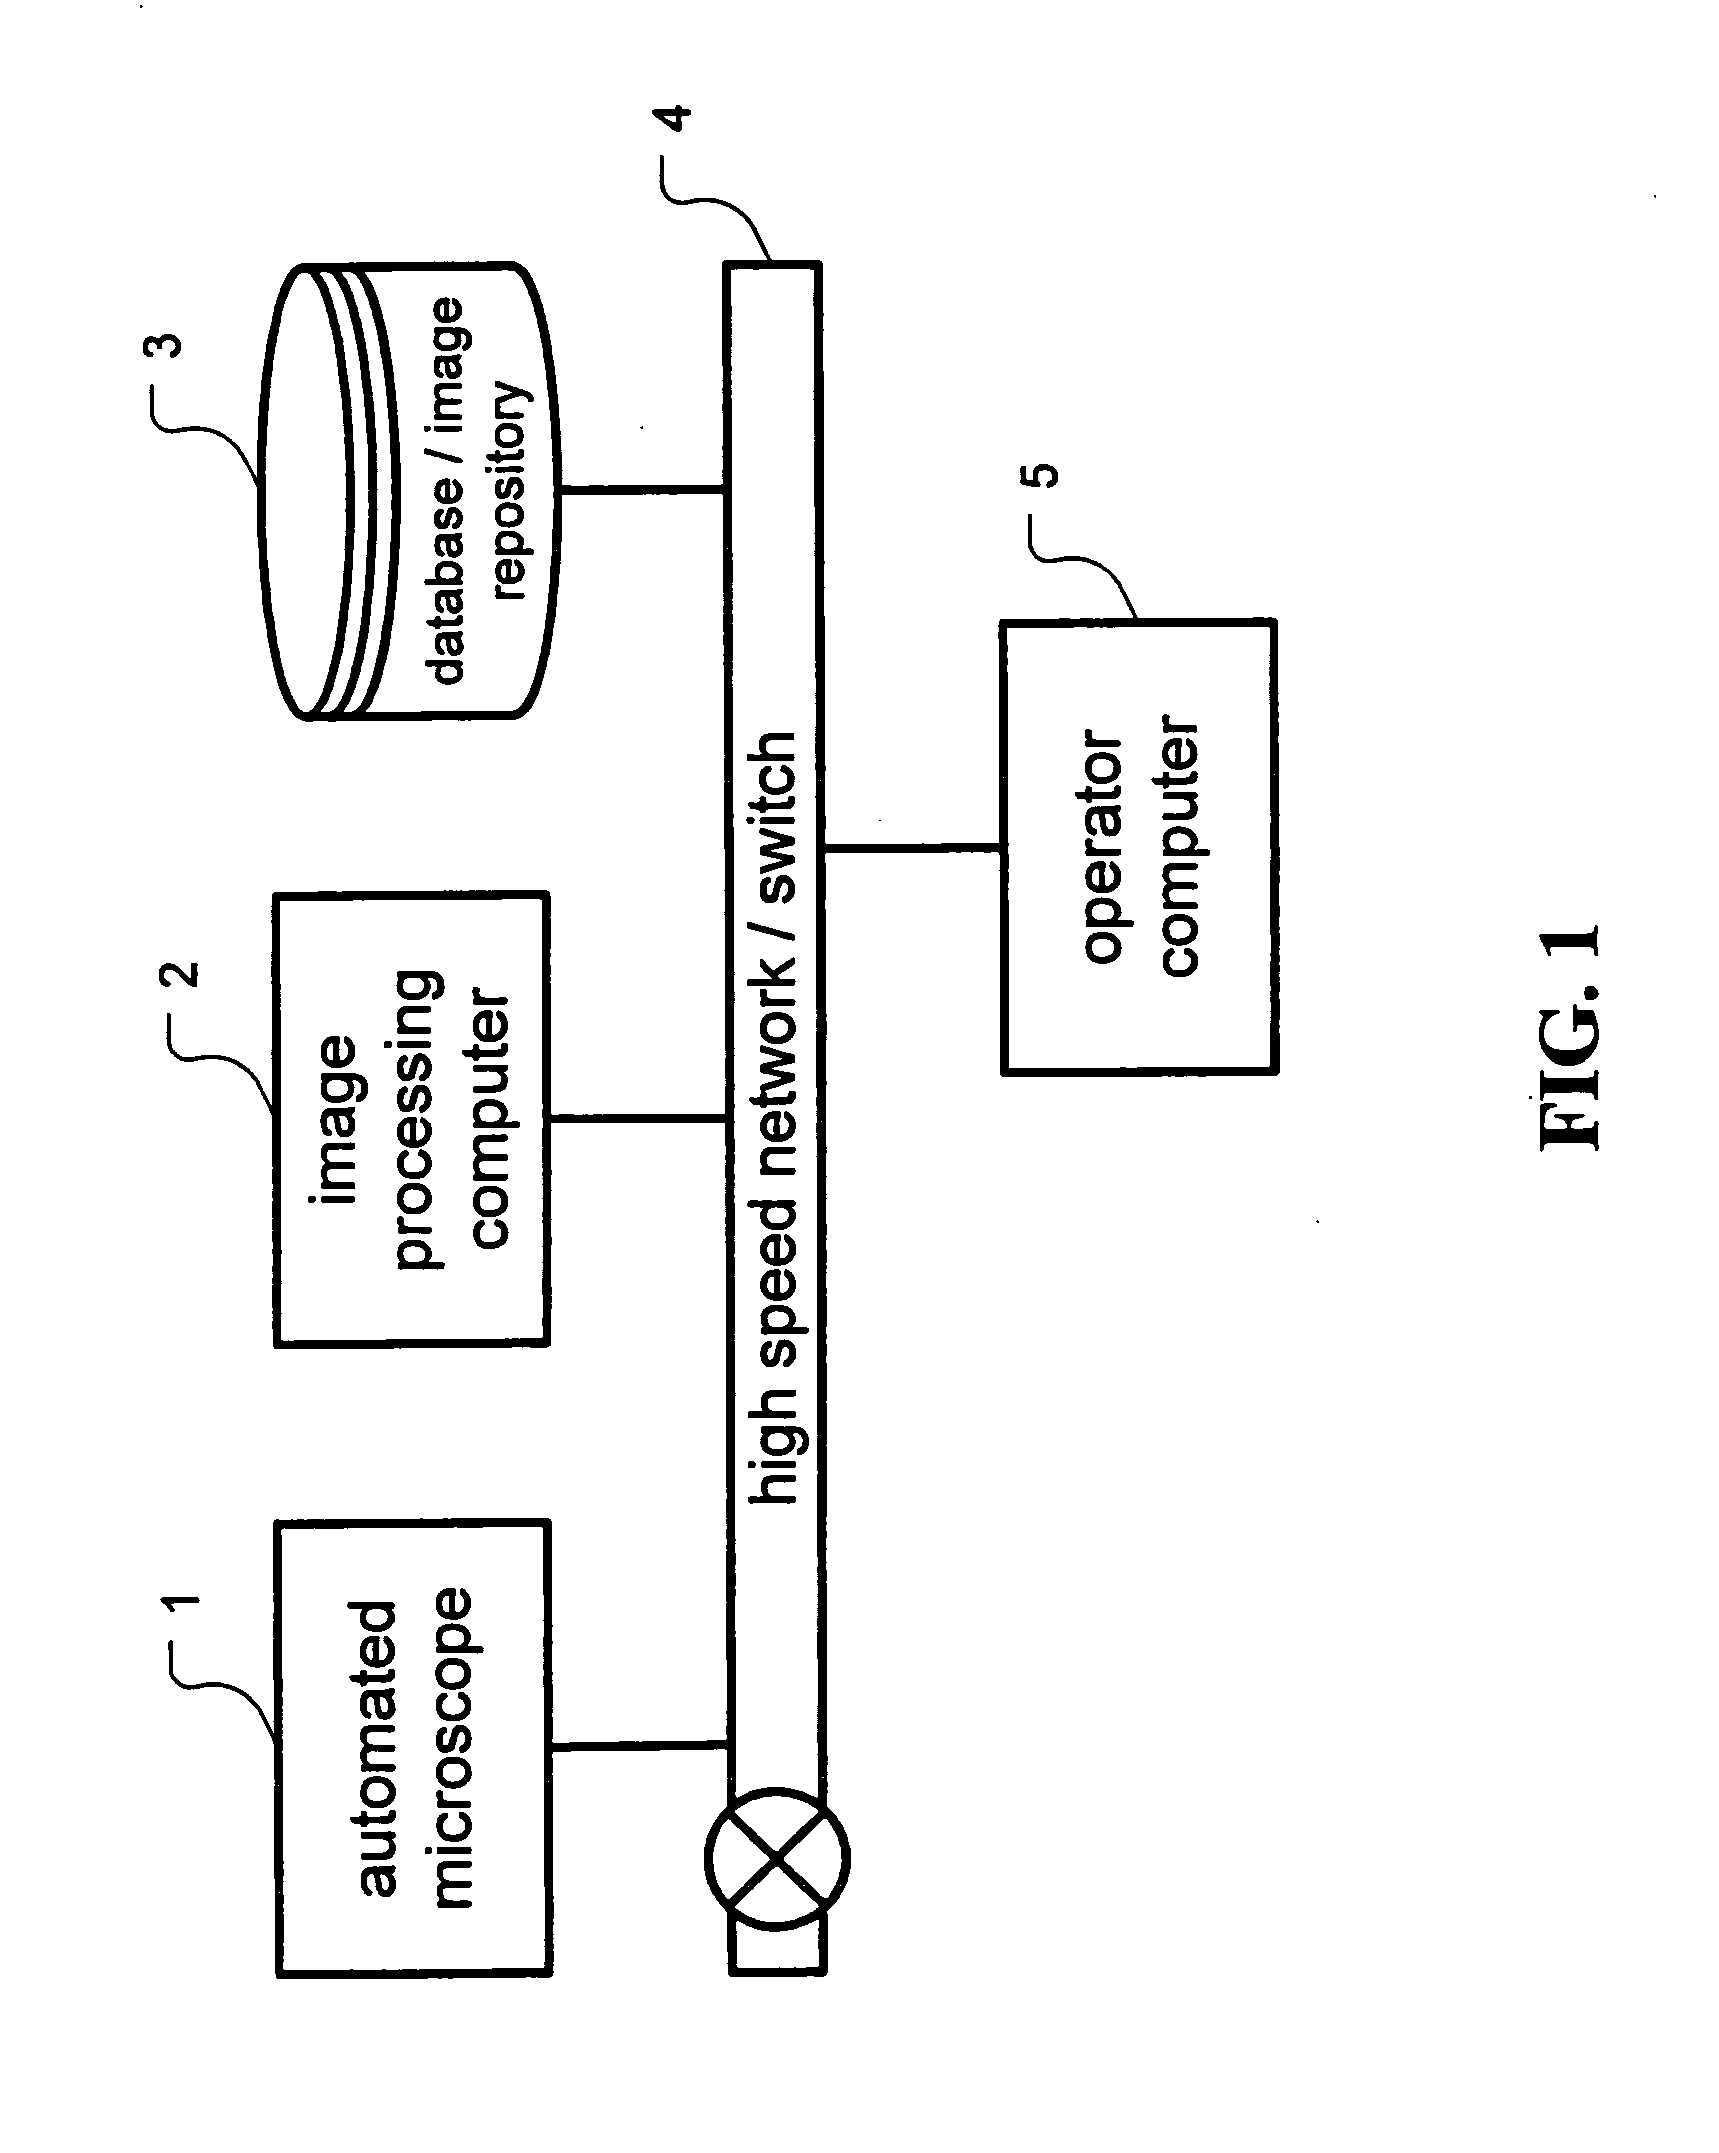 Method and apparatus for automated analysis of biological specimen